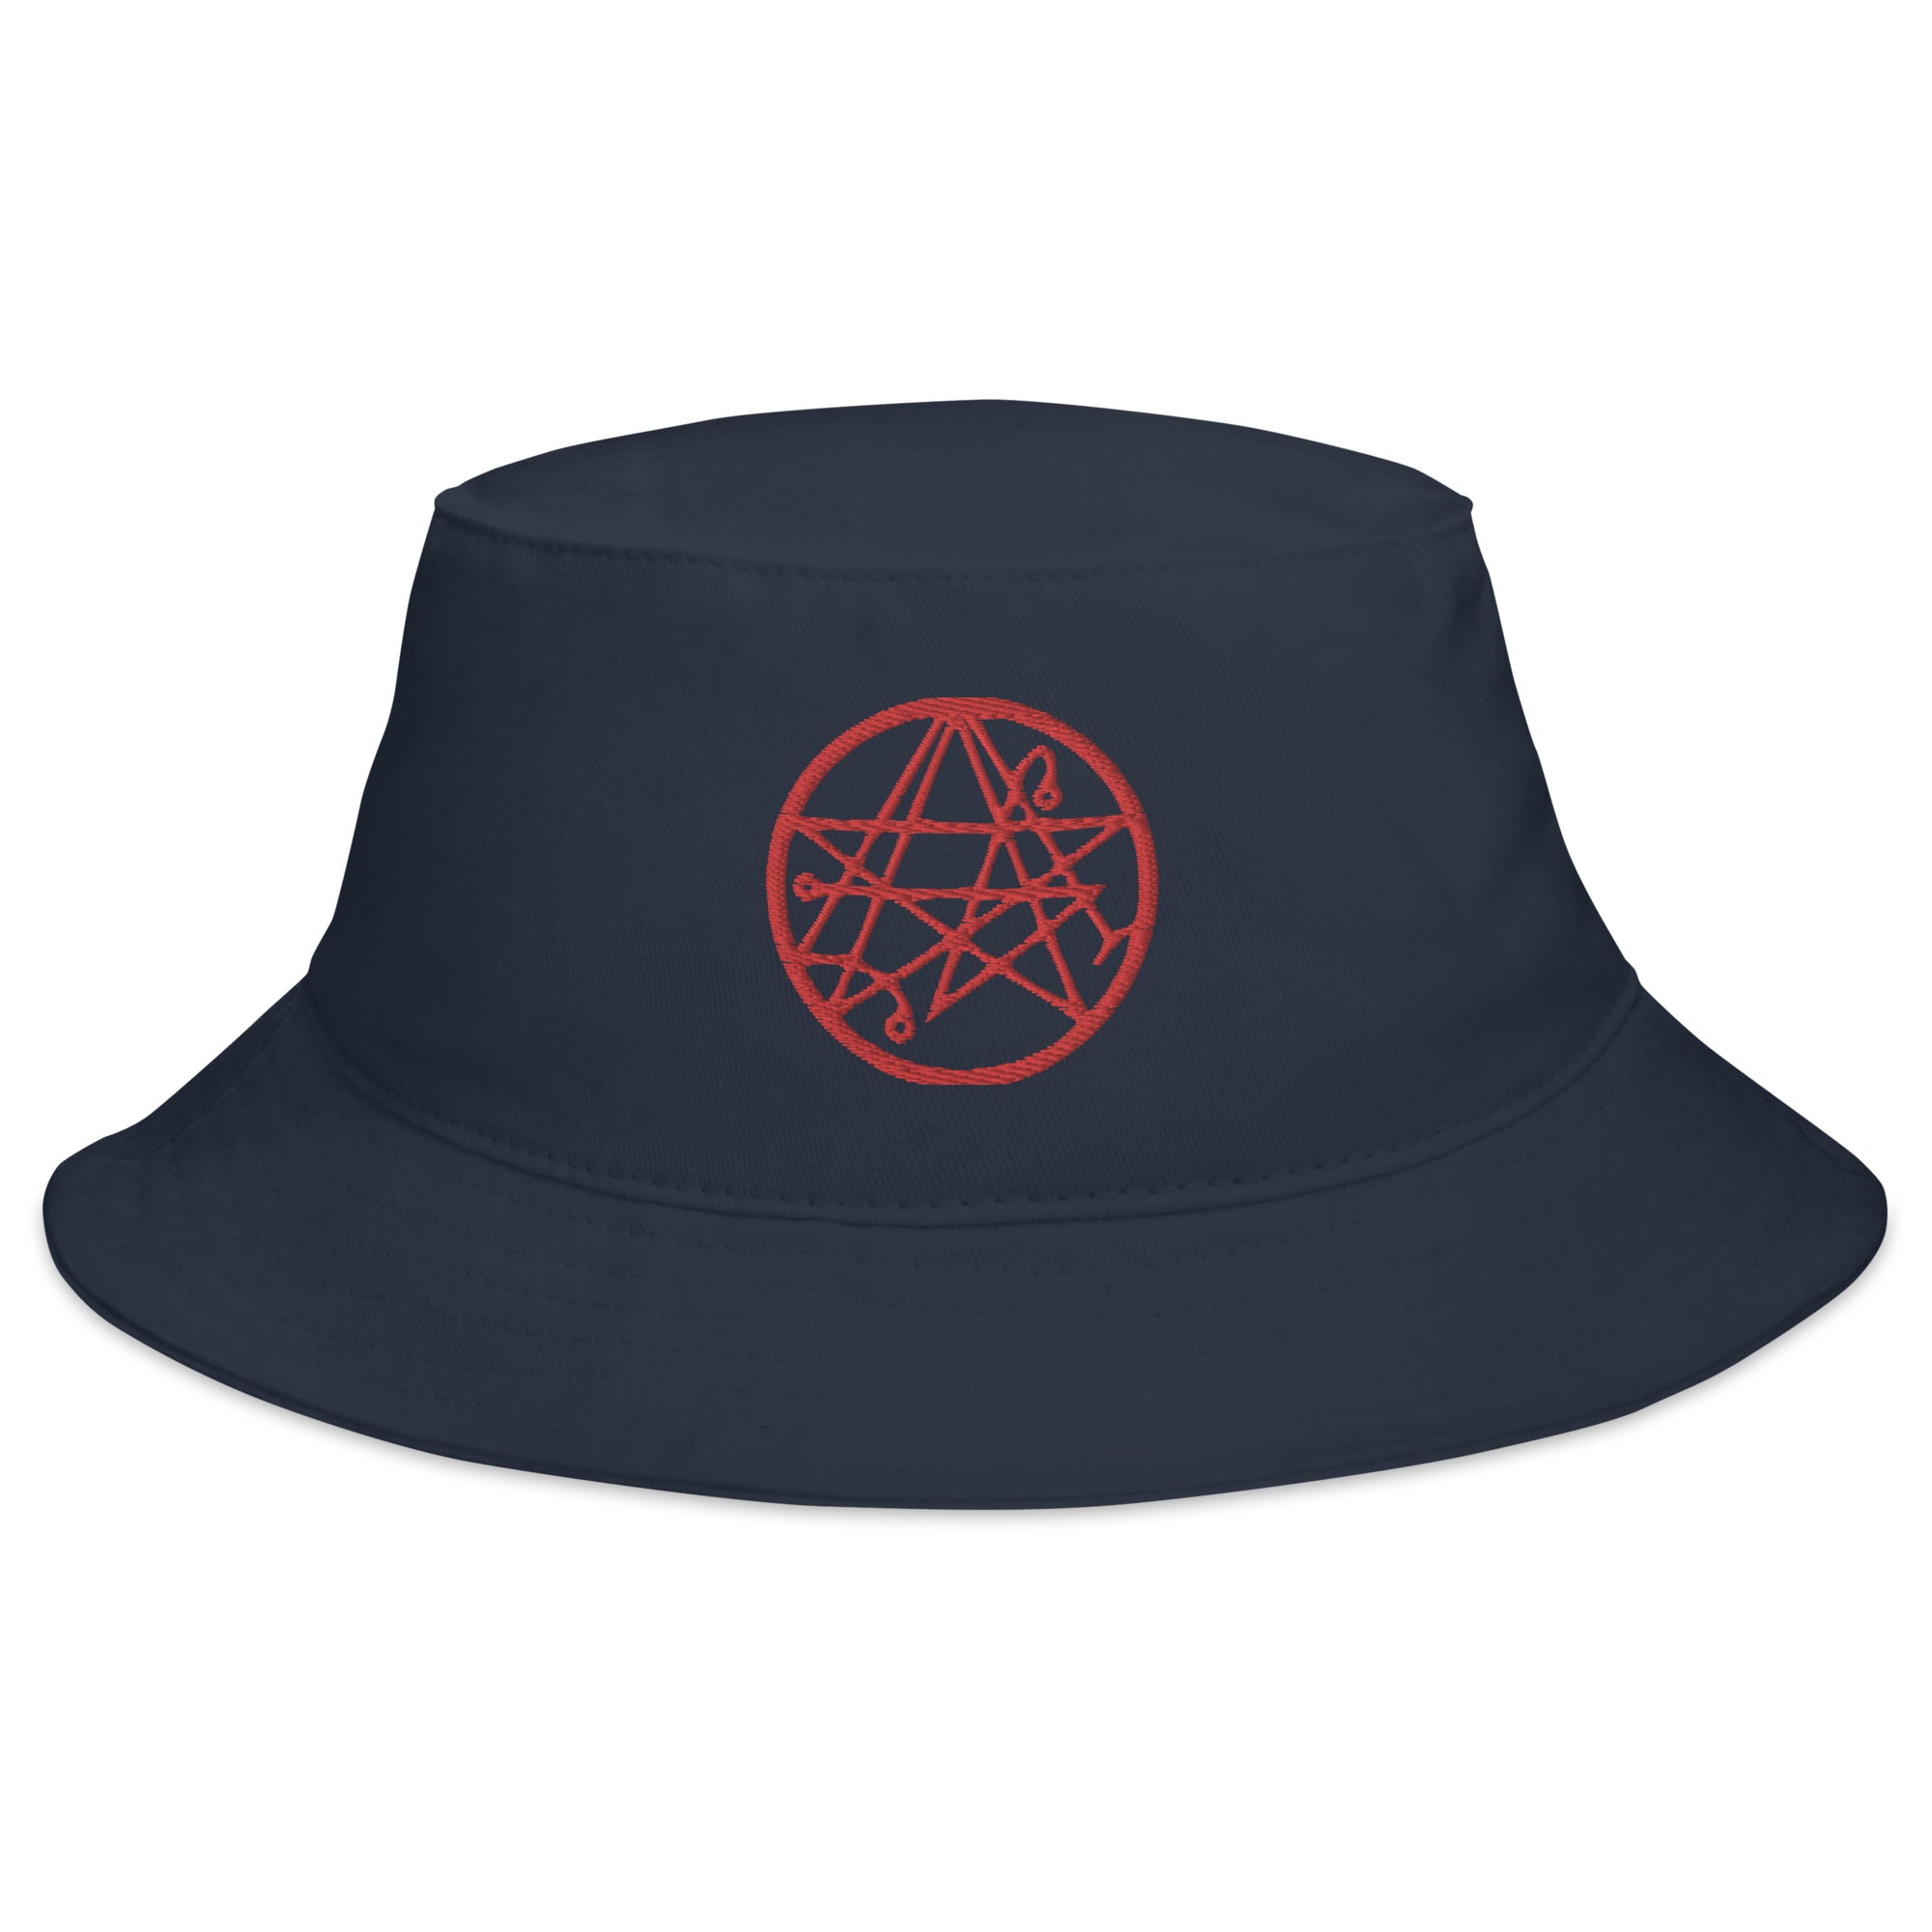 Necronomicon Symbol The Book of Dead Embroidered Bucket Hat H. P. Lovecraft